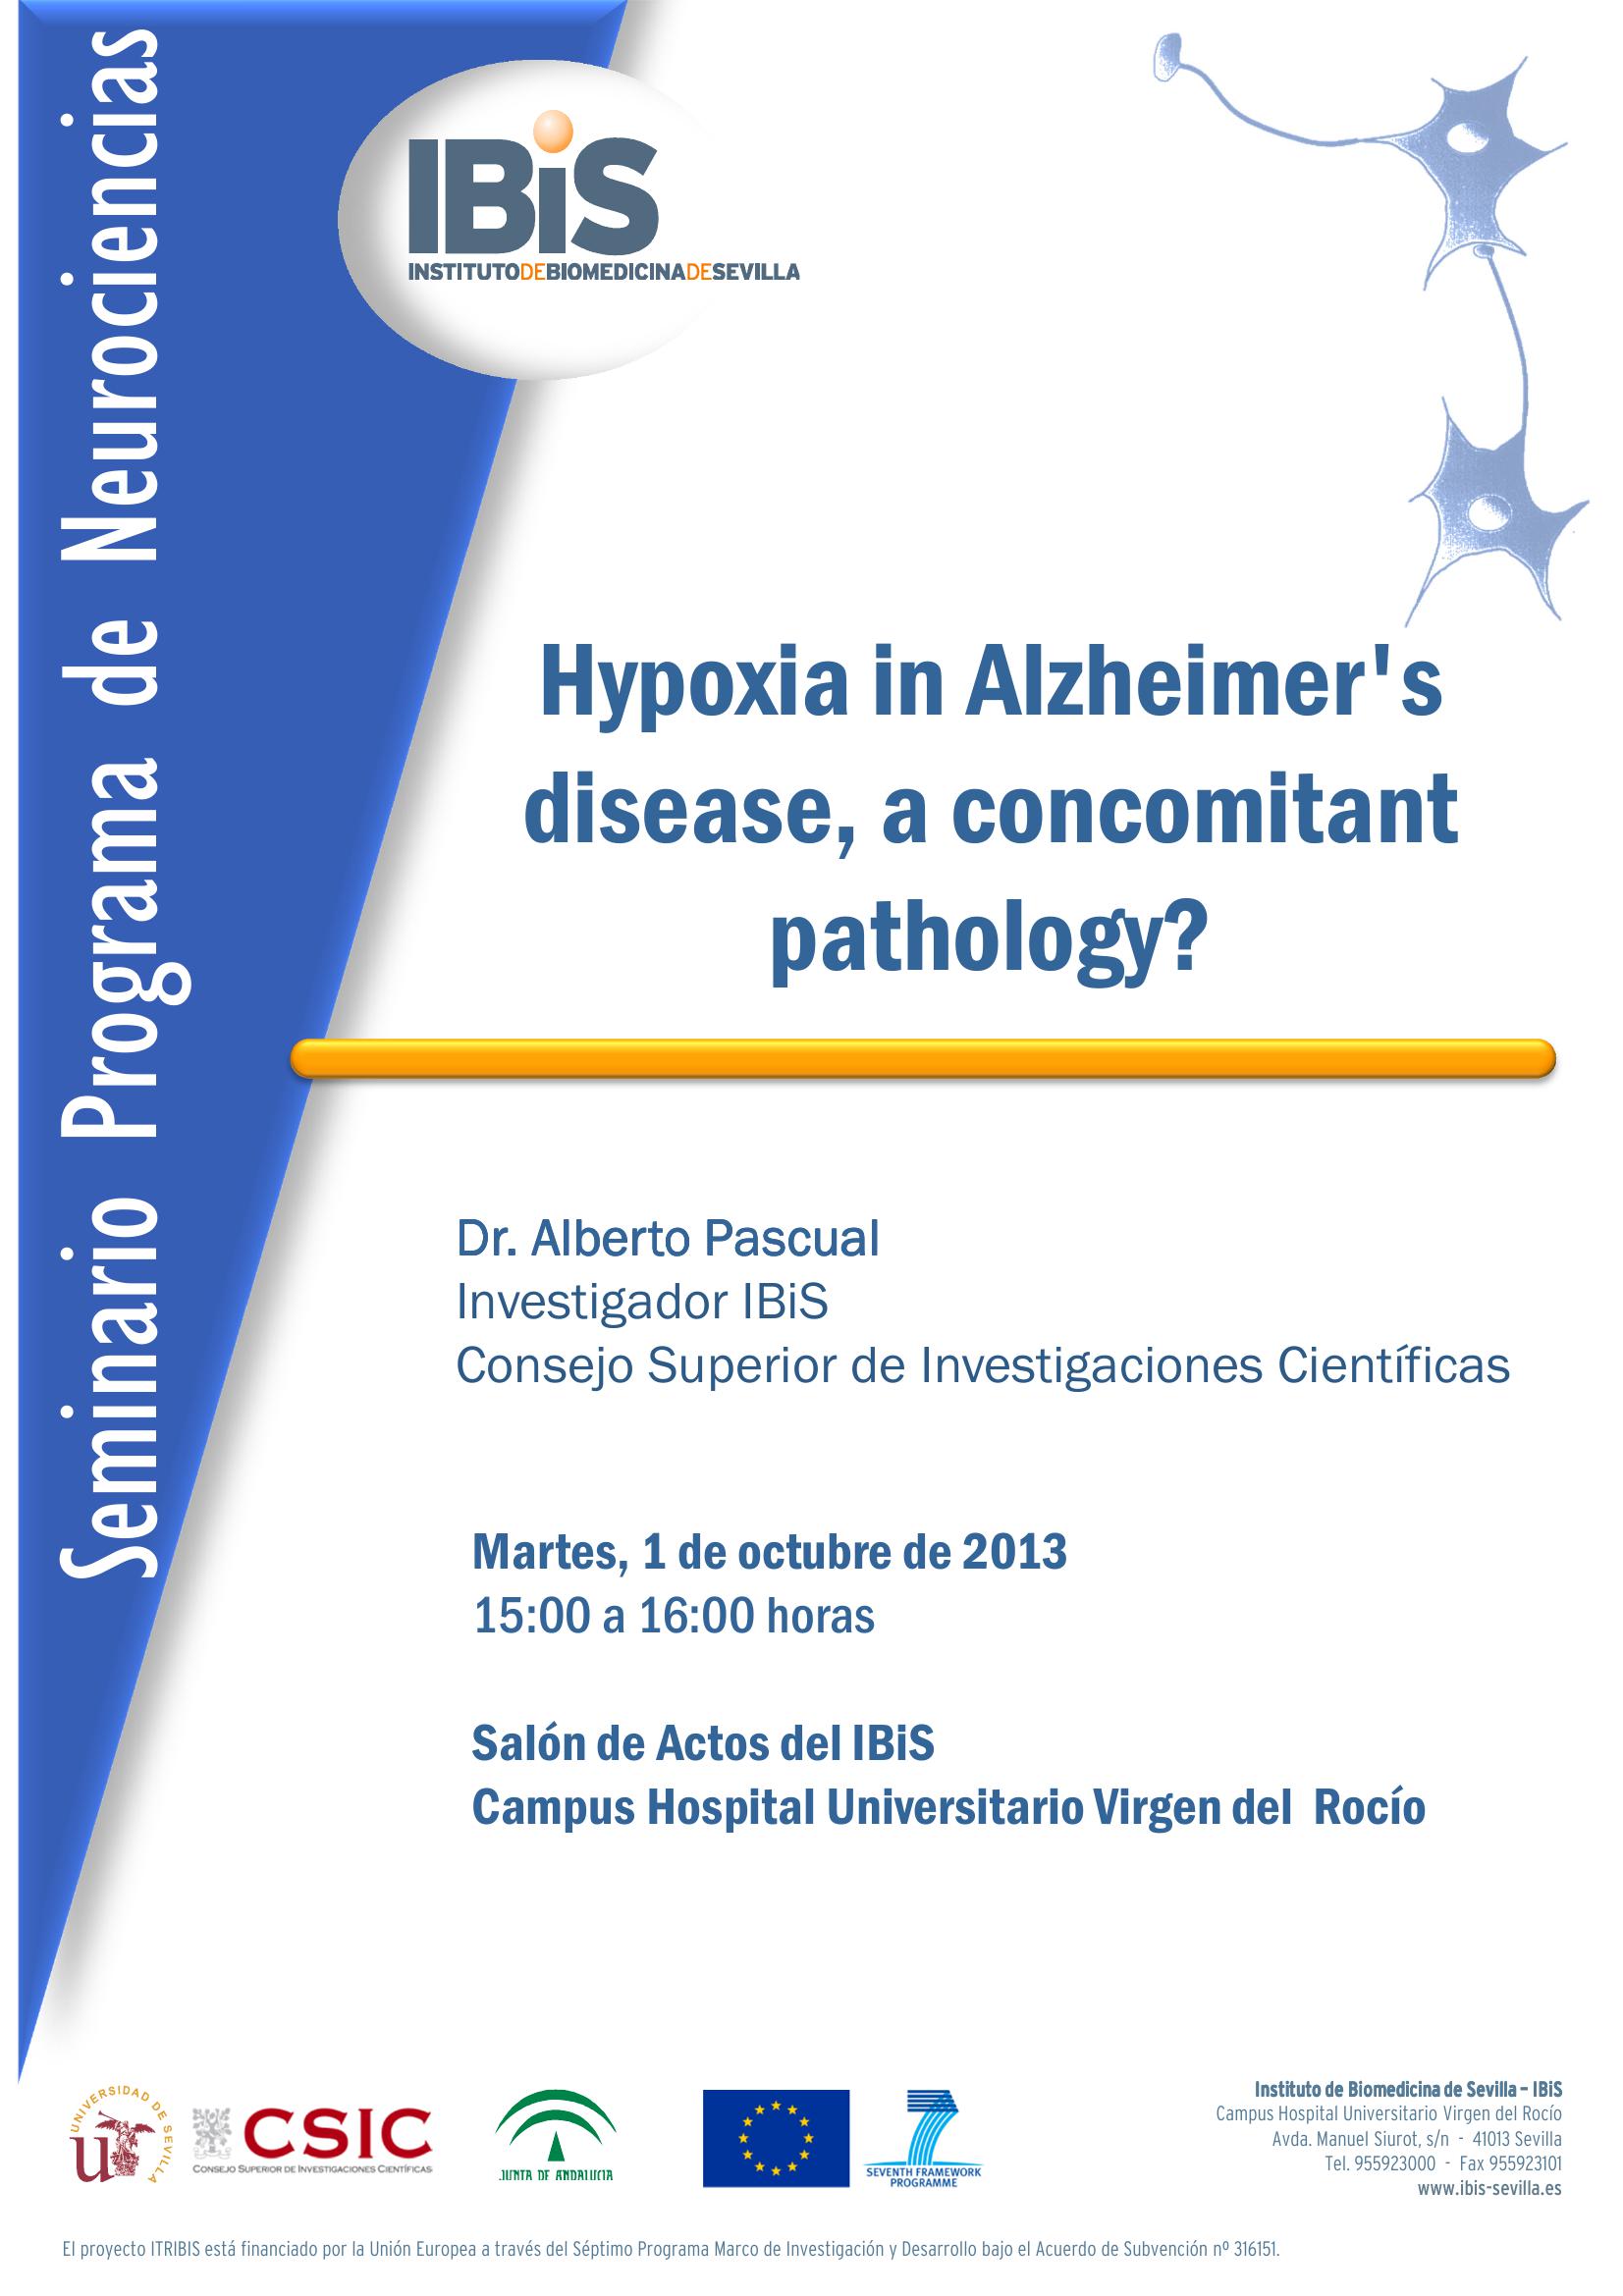 Poster: Hypoxia in Alzheimer's disease, a concomitant pathology?